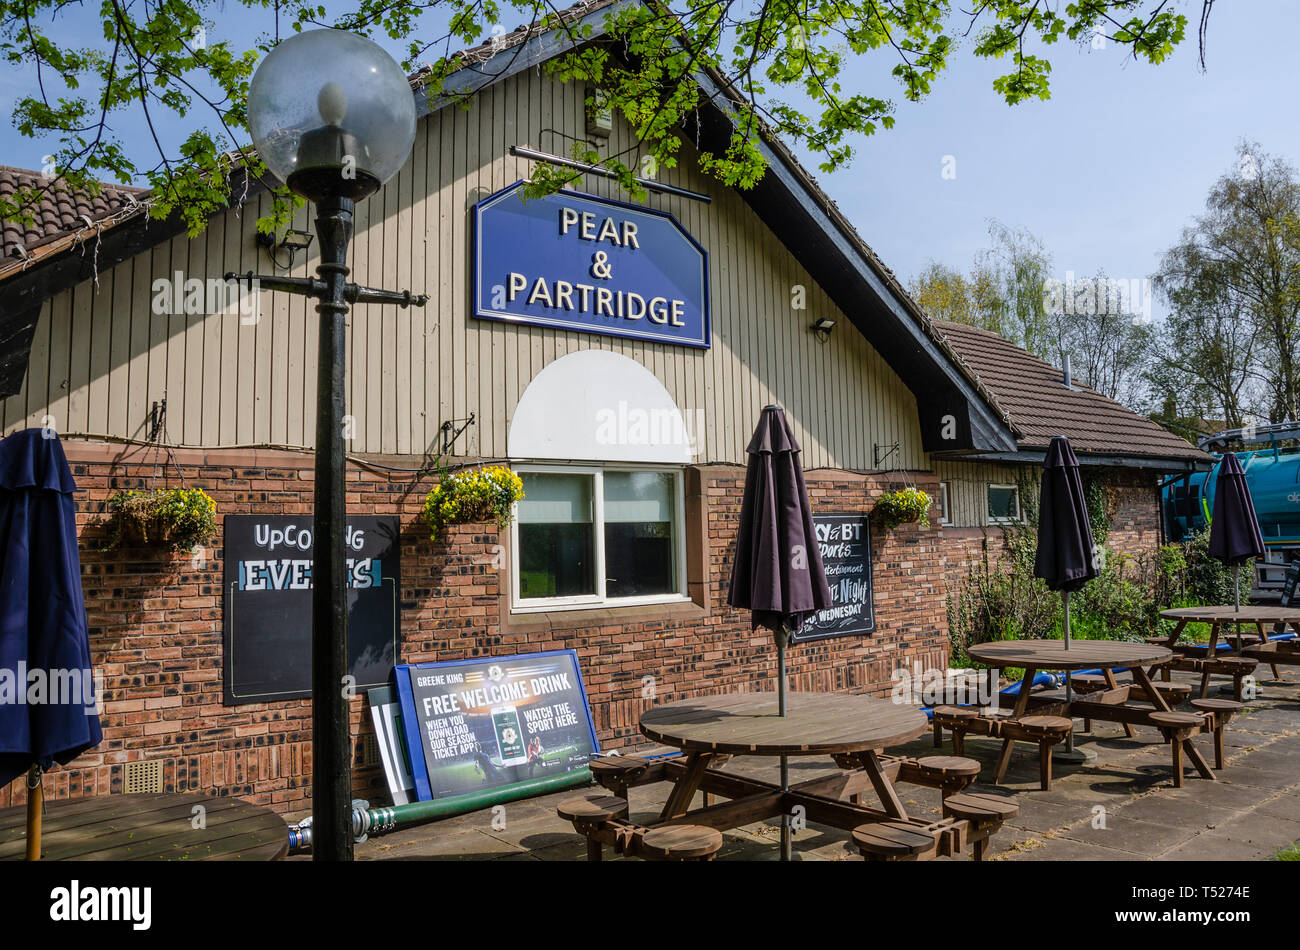 The Pear & Partridge pub in the village of Perton, South Staffordshire near Wolverhampton, UK. Stock Photo